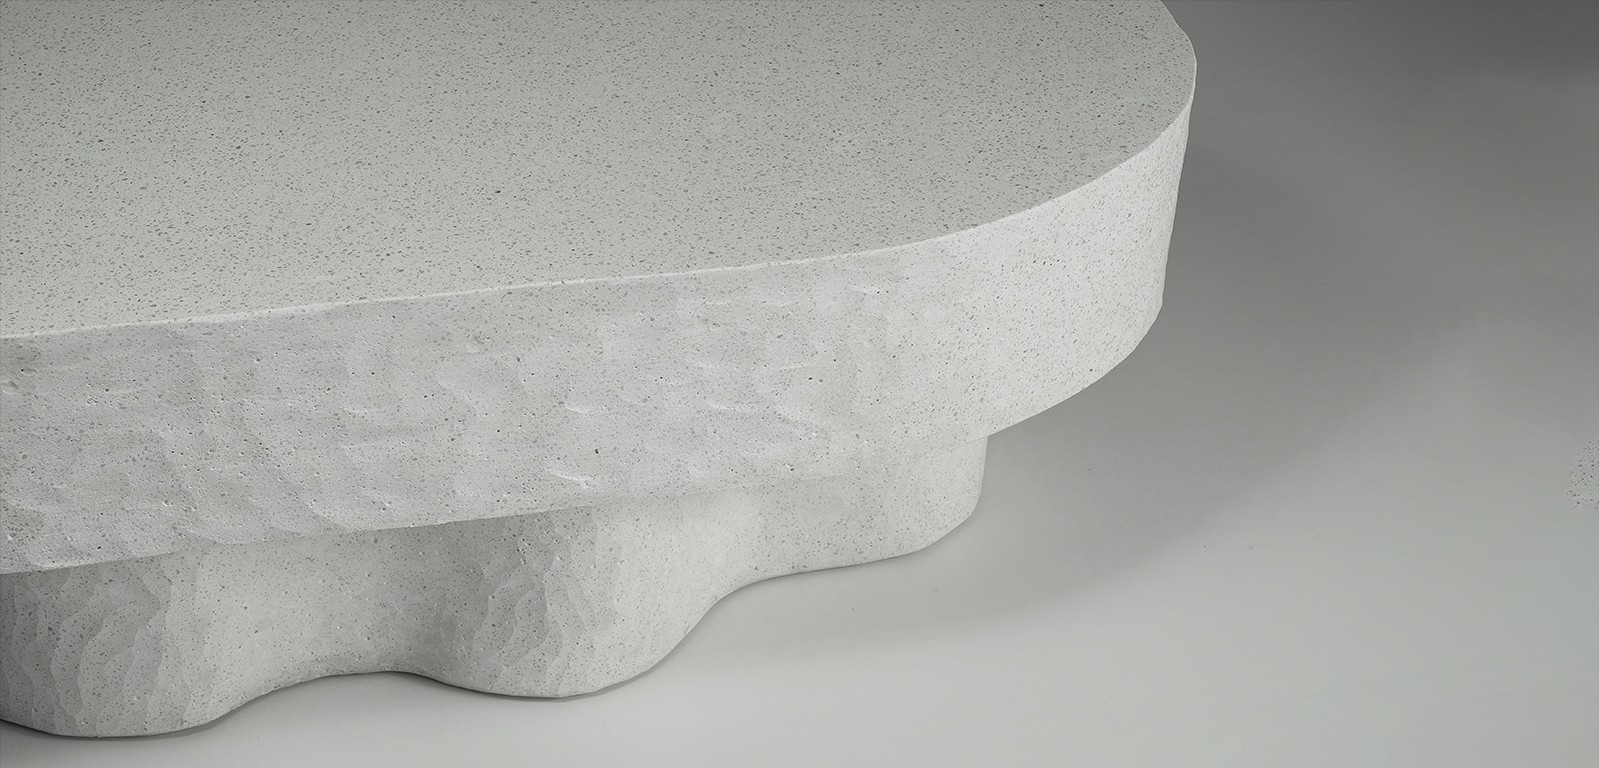 MEDUSA bench/table in white cast stone designed and handcrafted by Alentes Atelier.